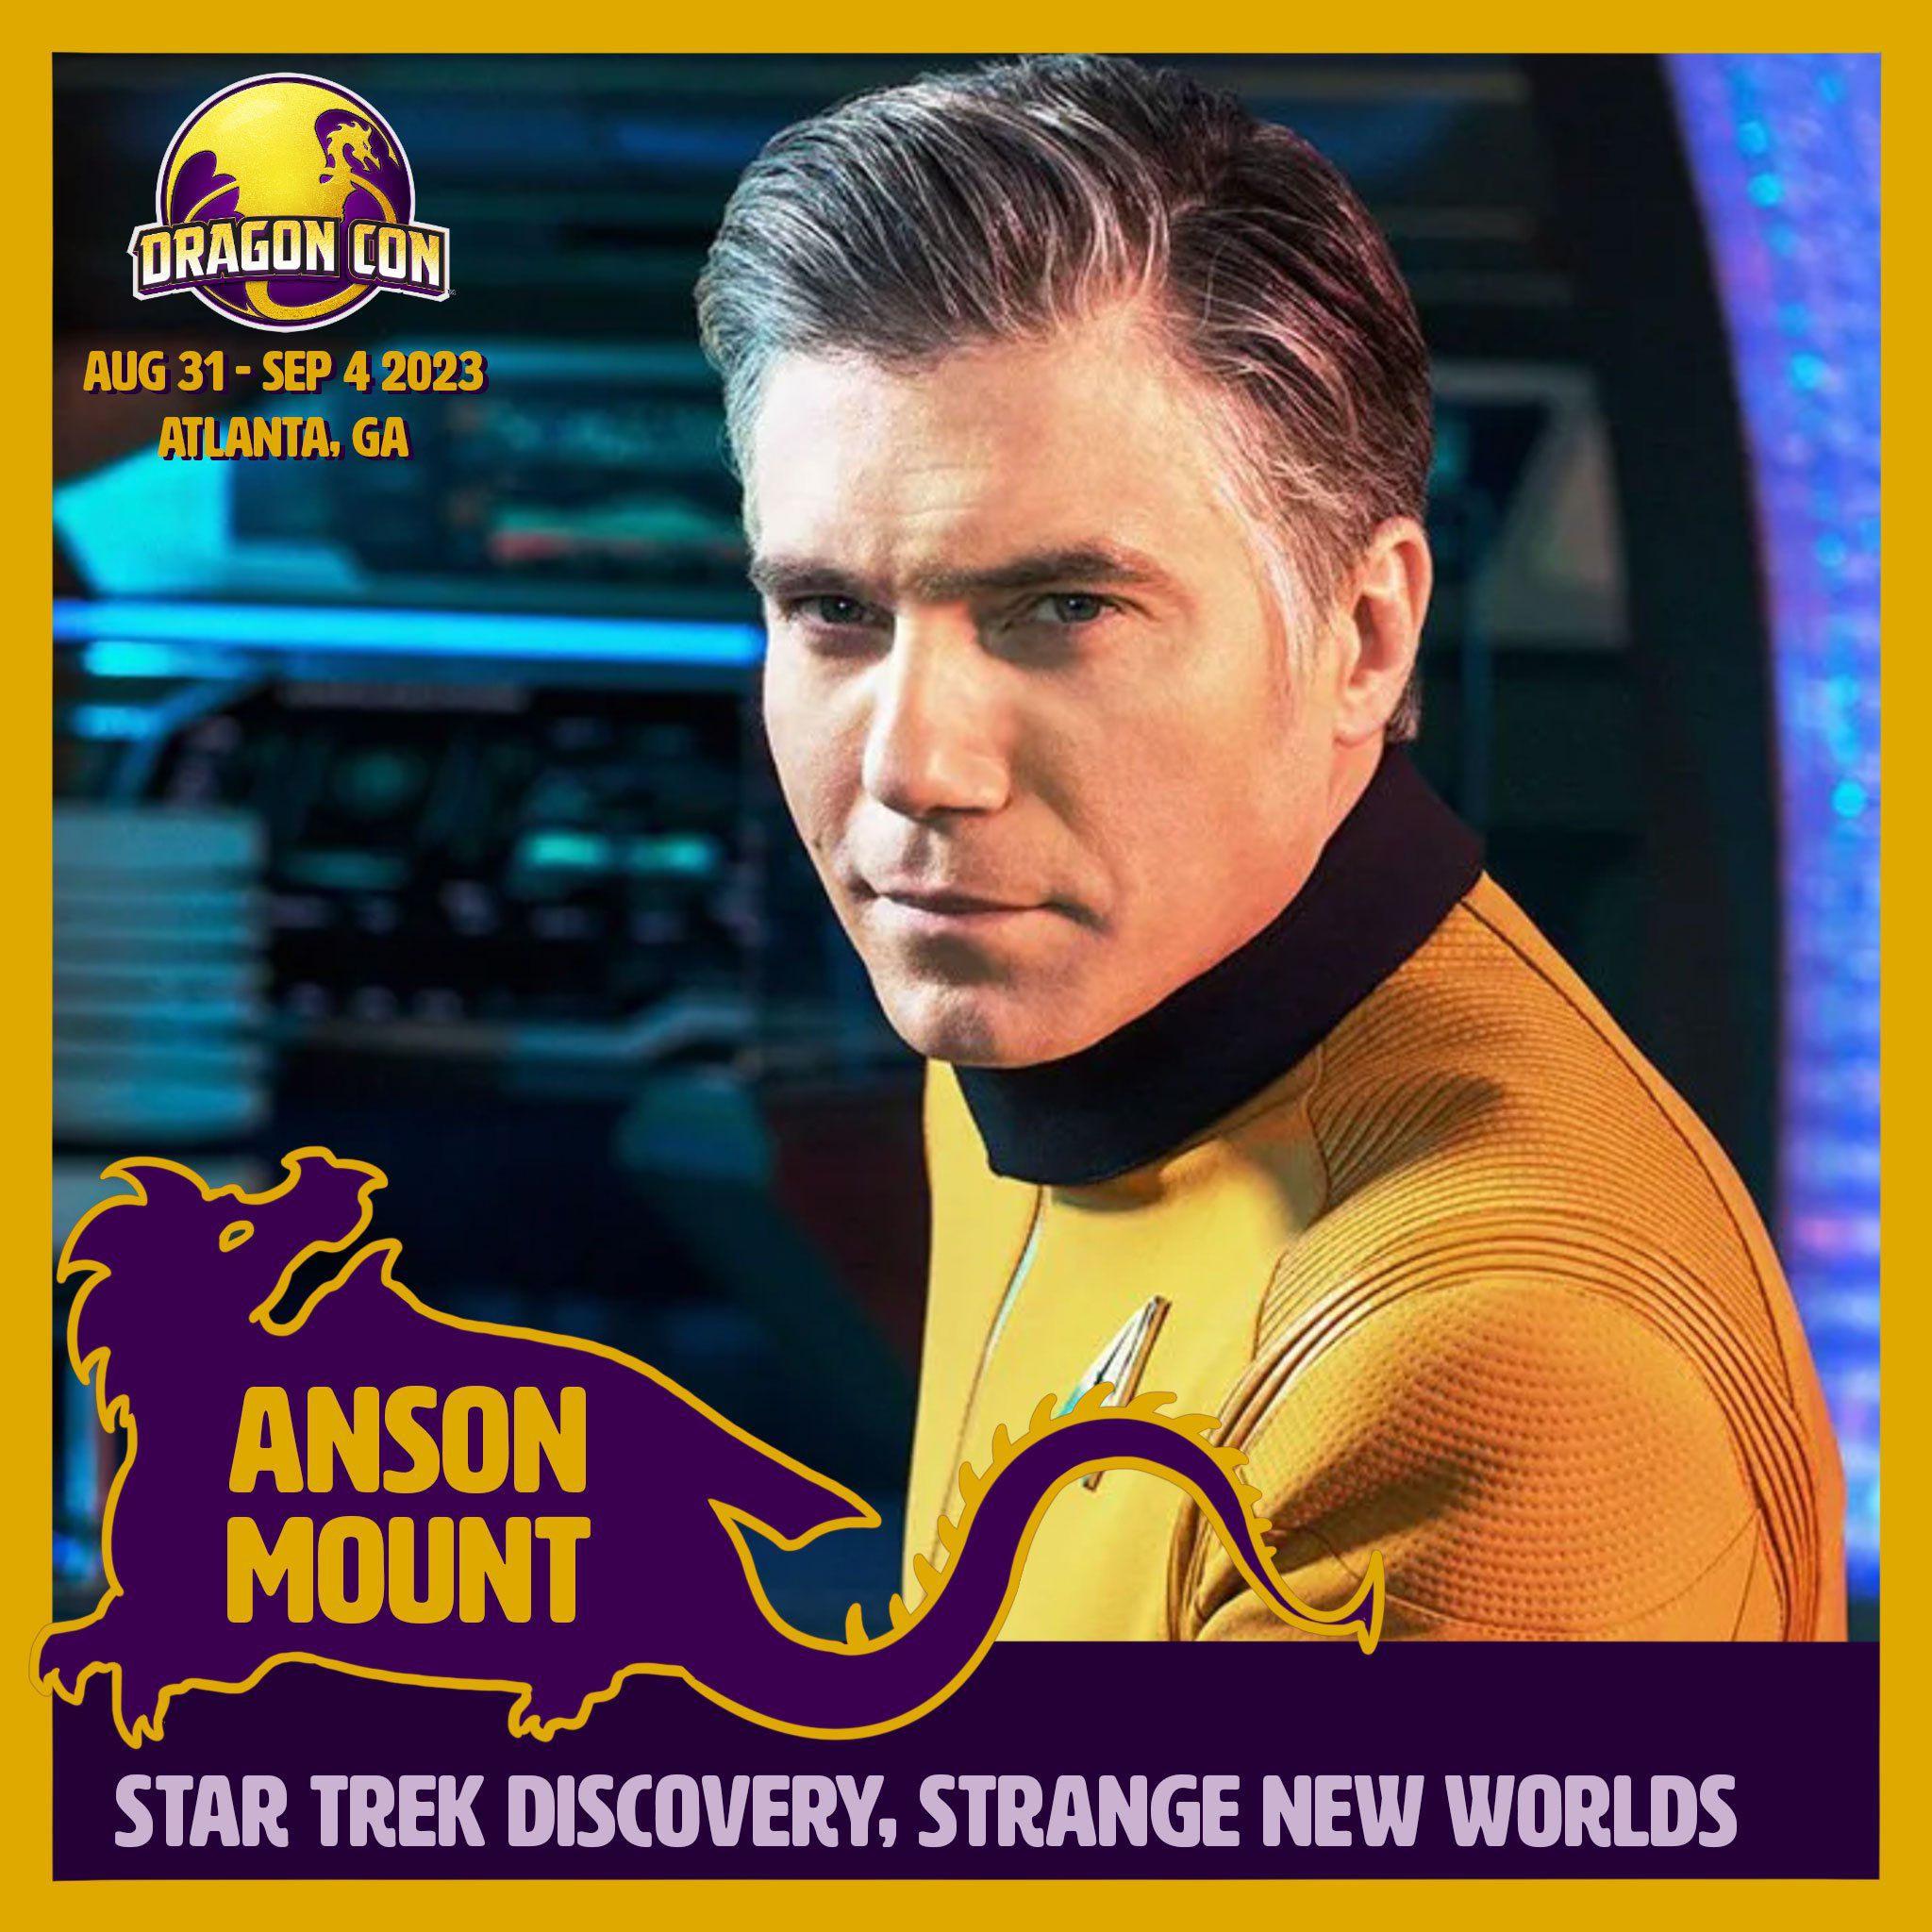 Check out the 2023 guest lineup for DragonCon, coming to an Atlanta